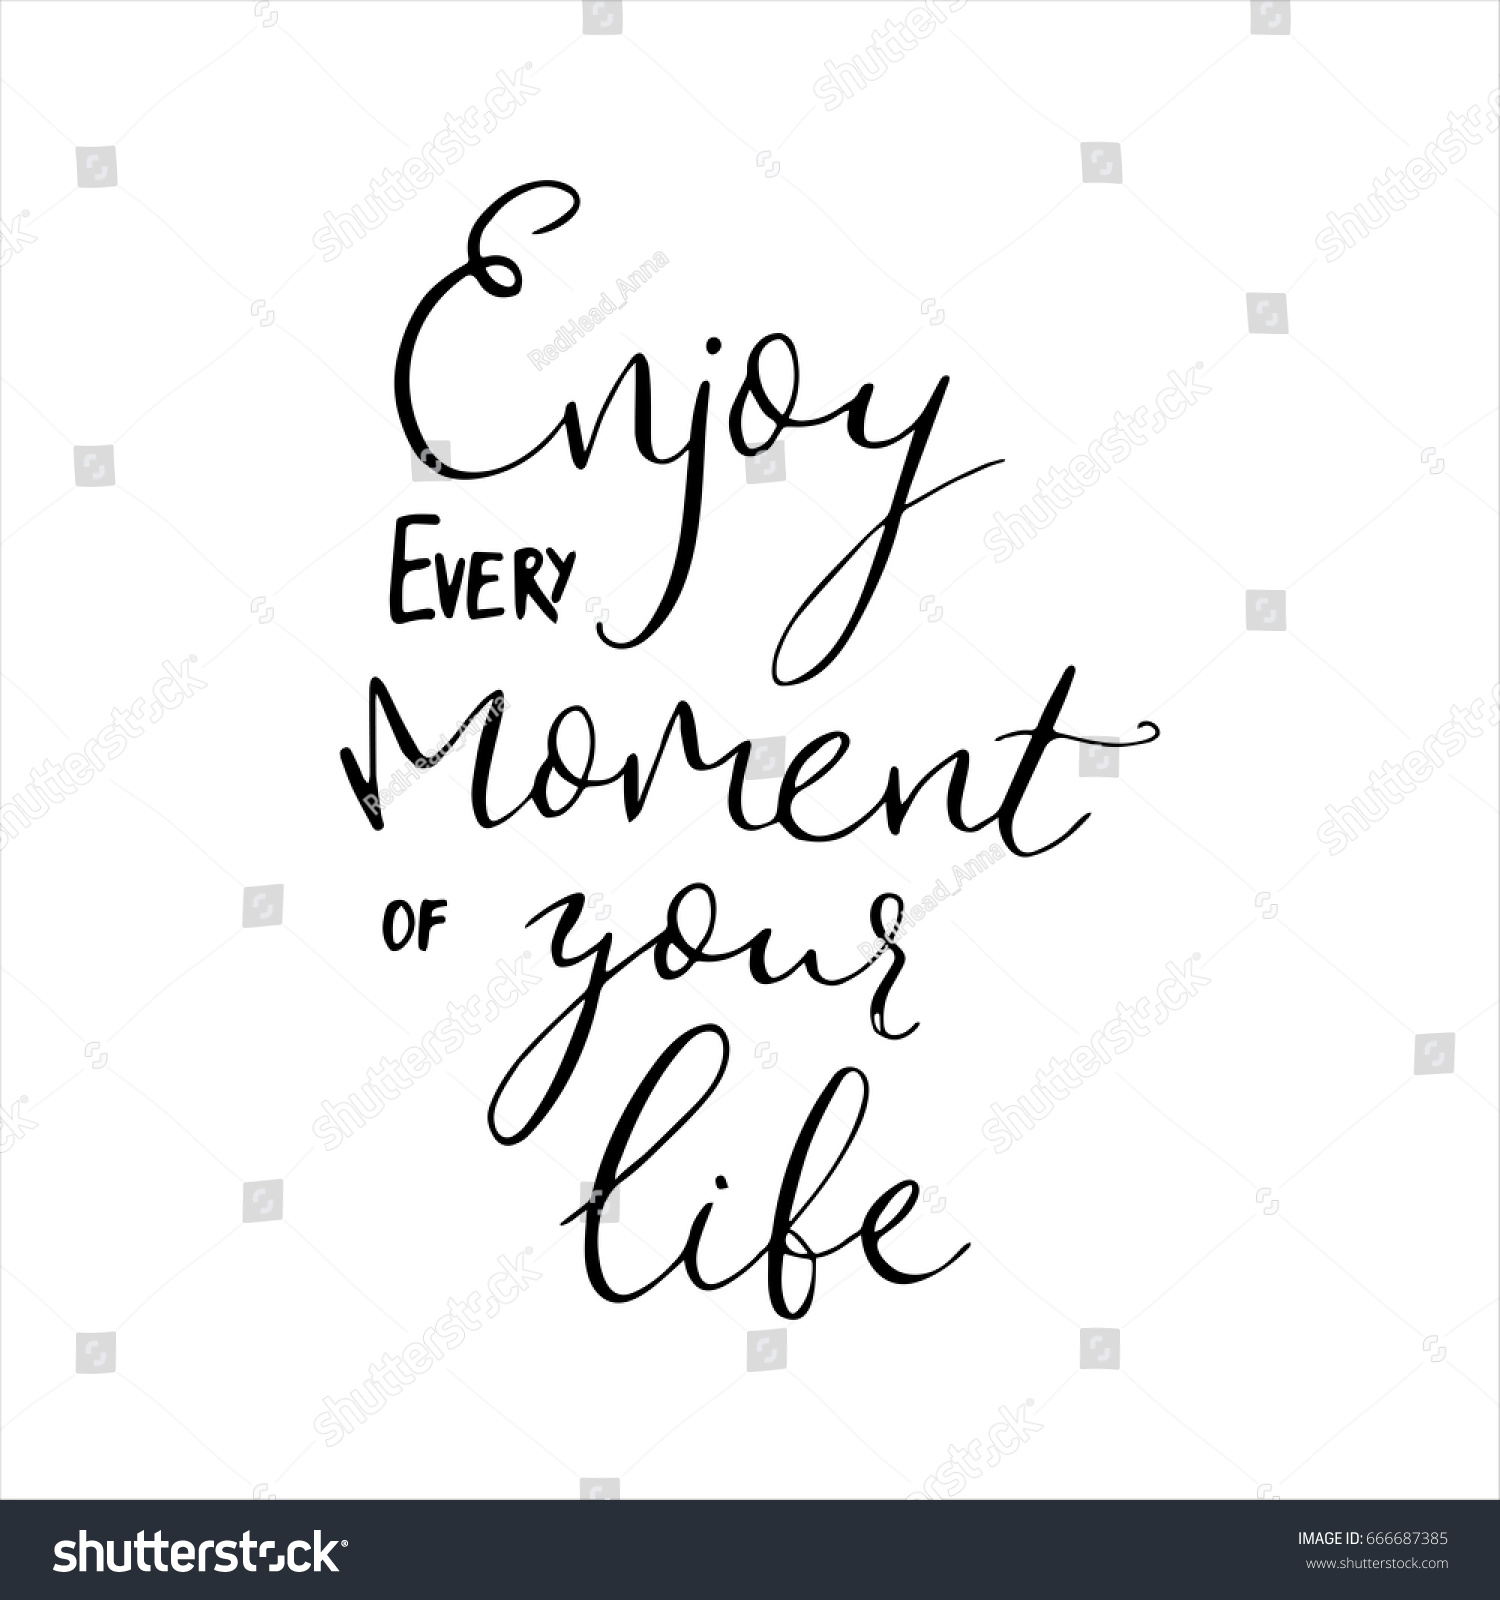 Enjoy every moment of your life quote Vector calligraphy Hand drawn lettering poster